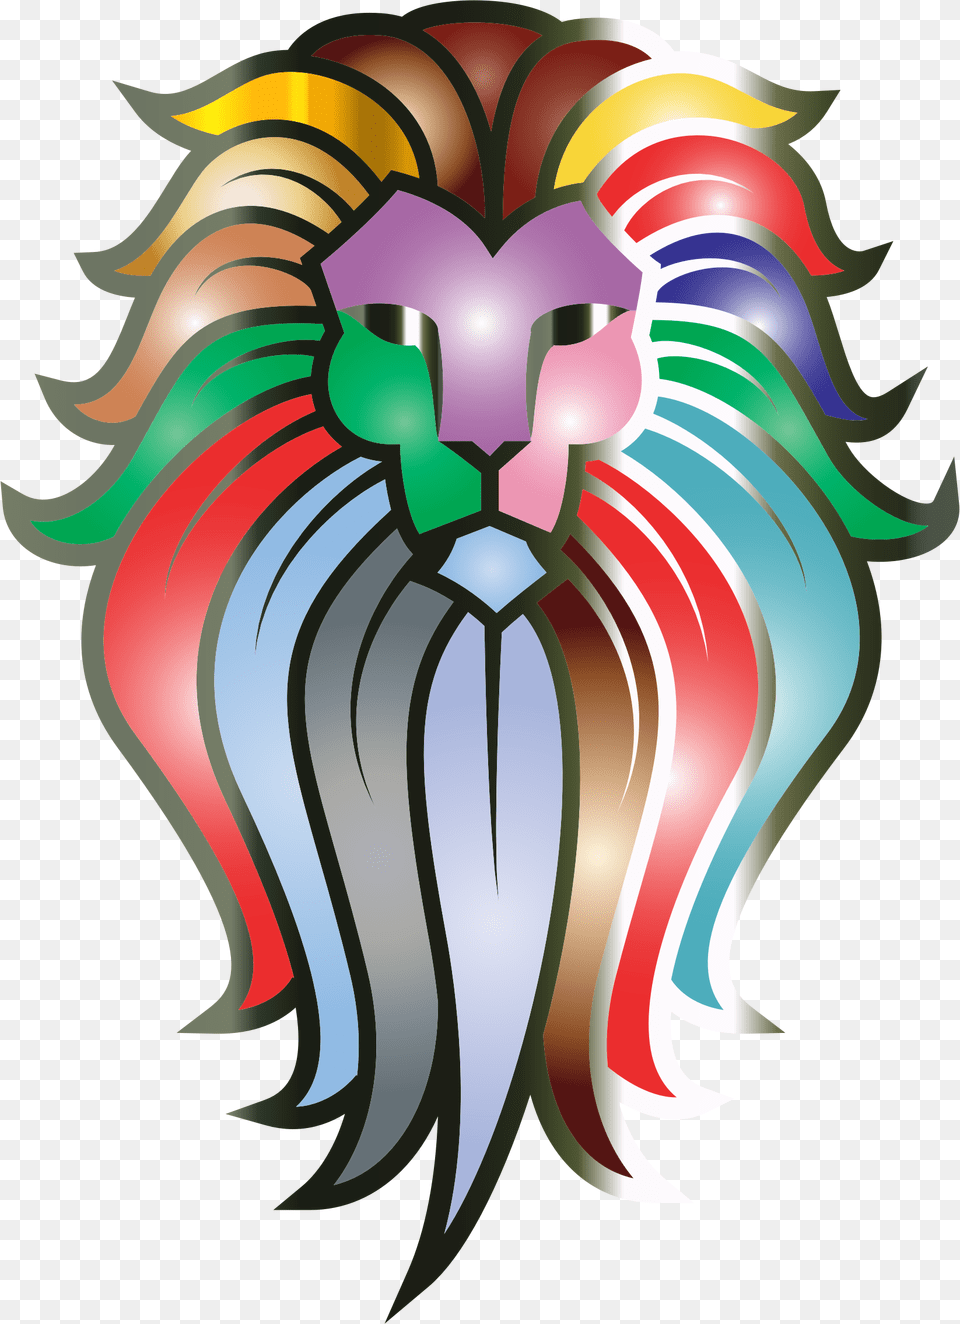 This Icons Design Of Chromatic Lion Face Tattoo, Art, Graphics, Dynamite, Weapon Png